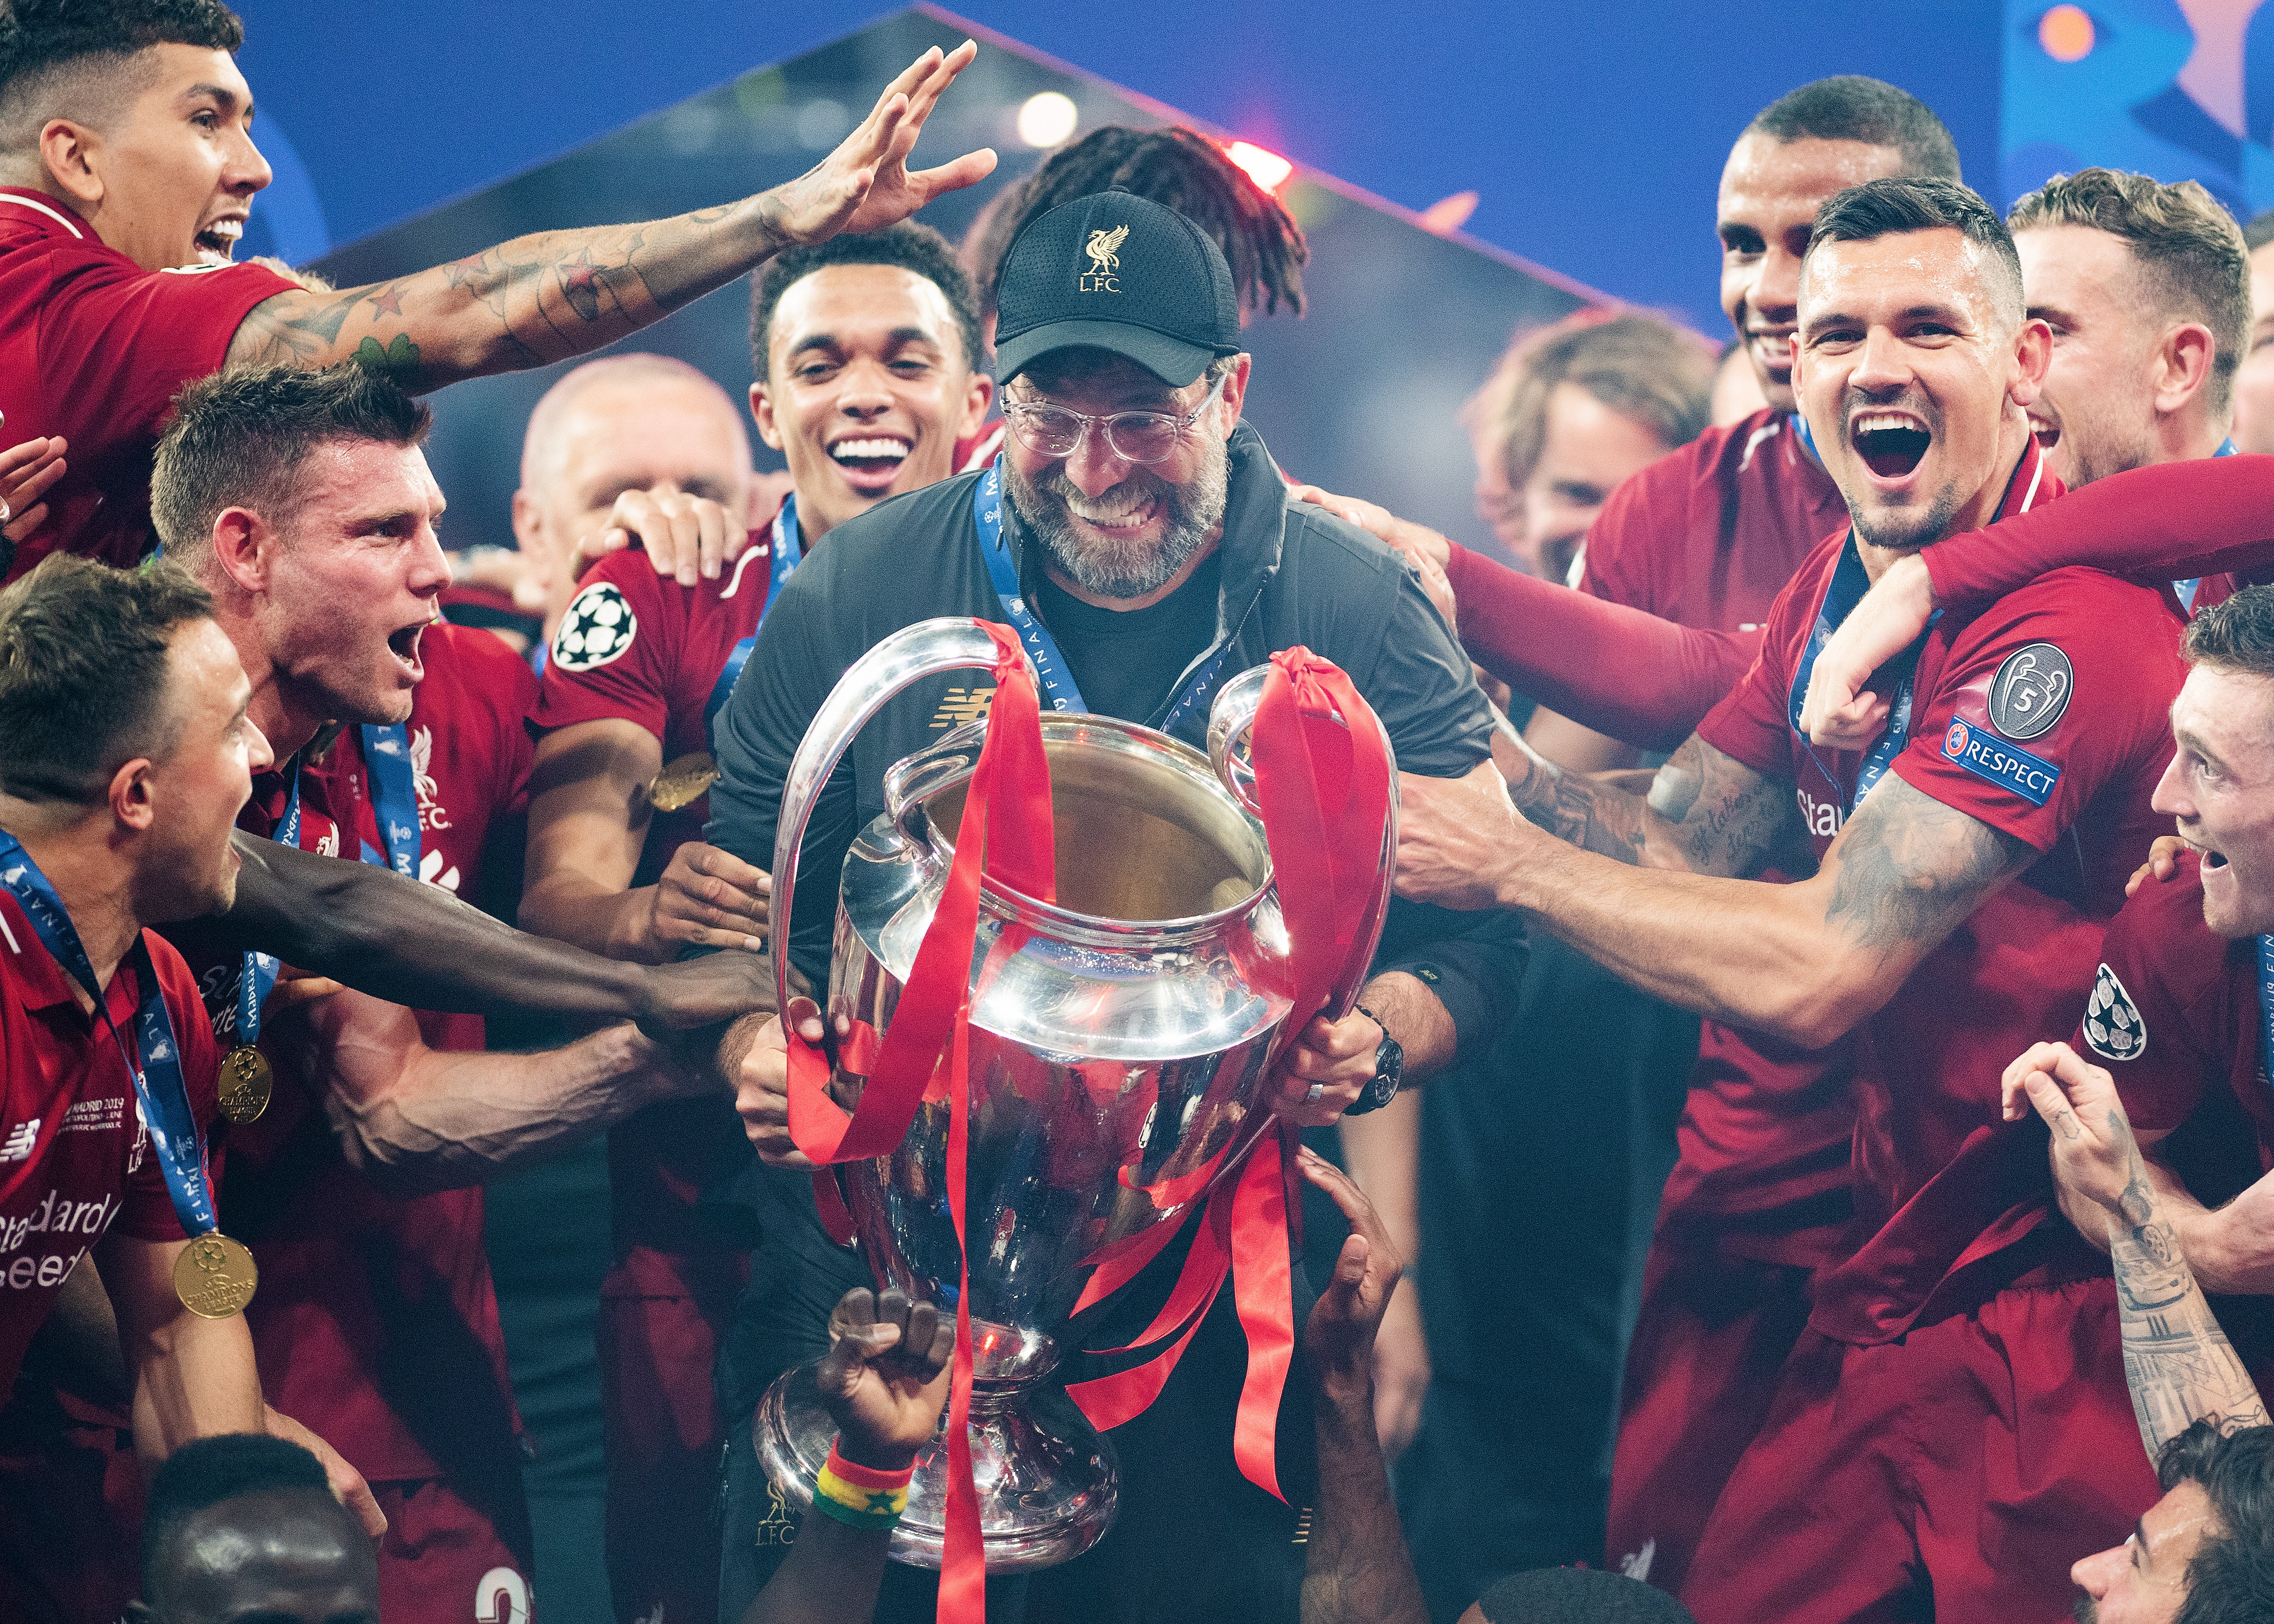 Jurgen Klopp only won one Champions League with Liverpool